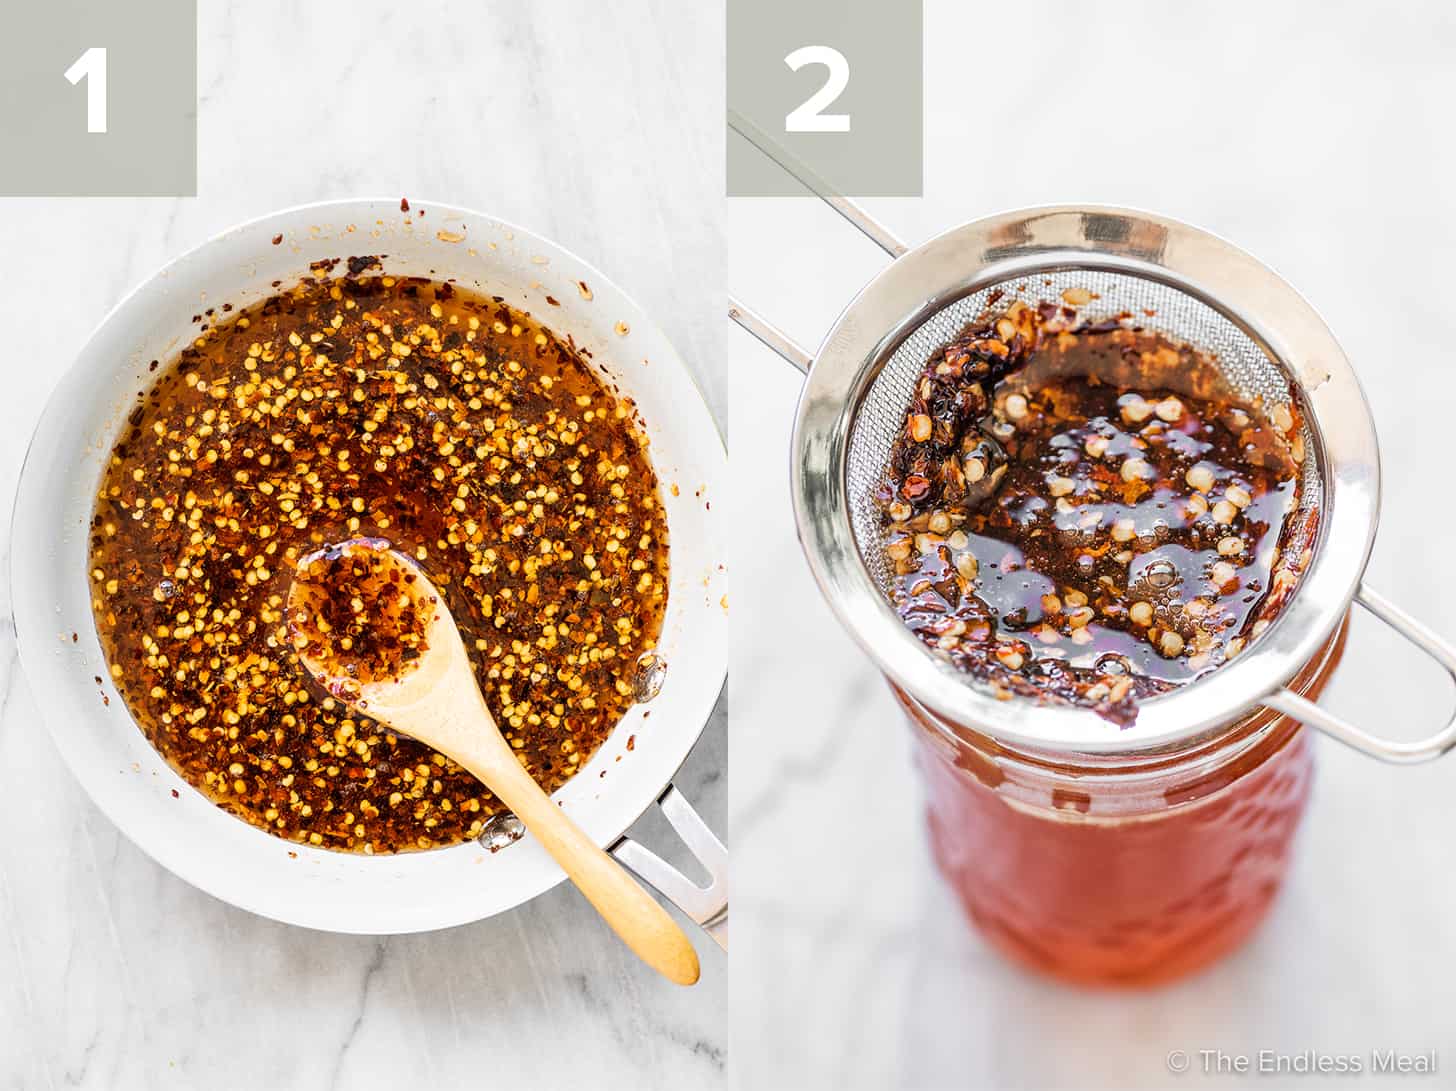 2 pictures showing the steps to make hot honey.